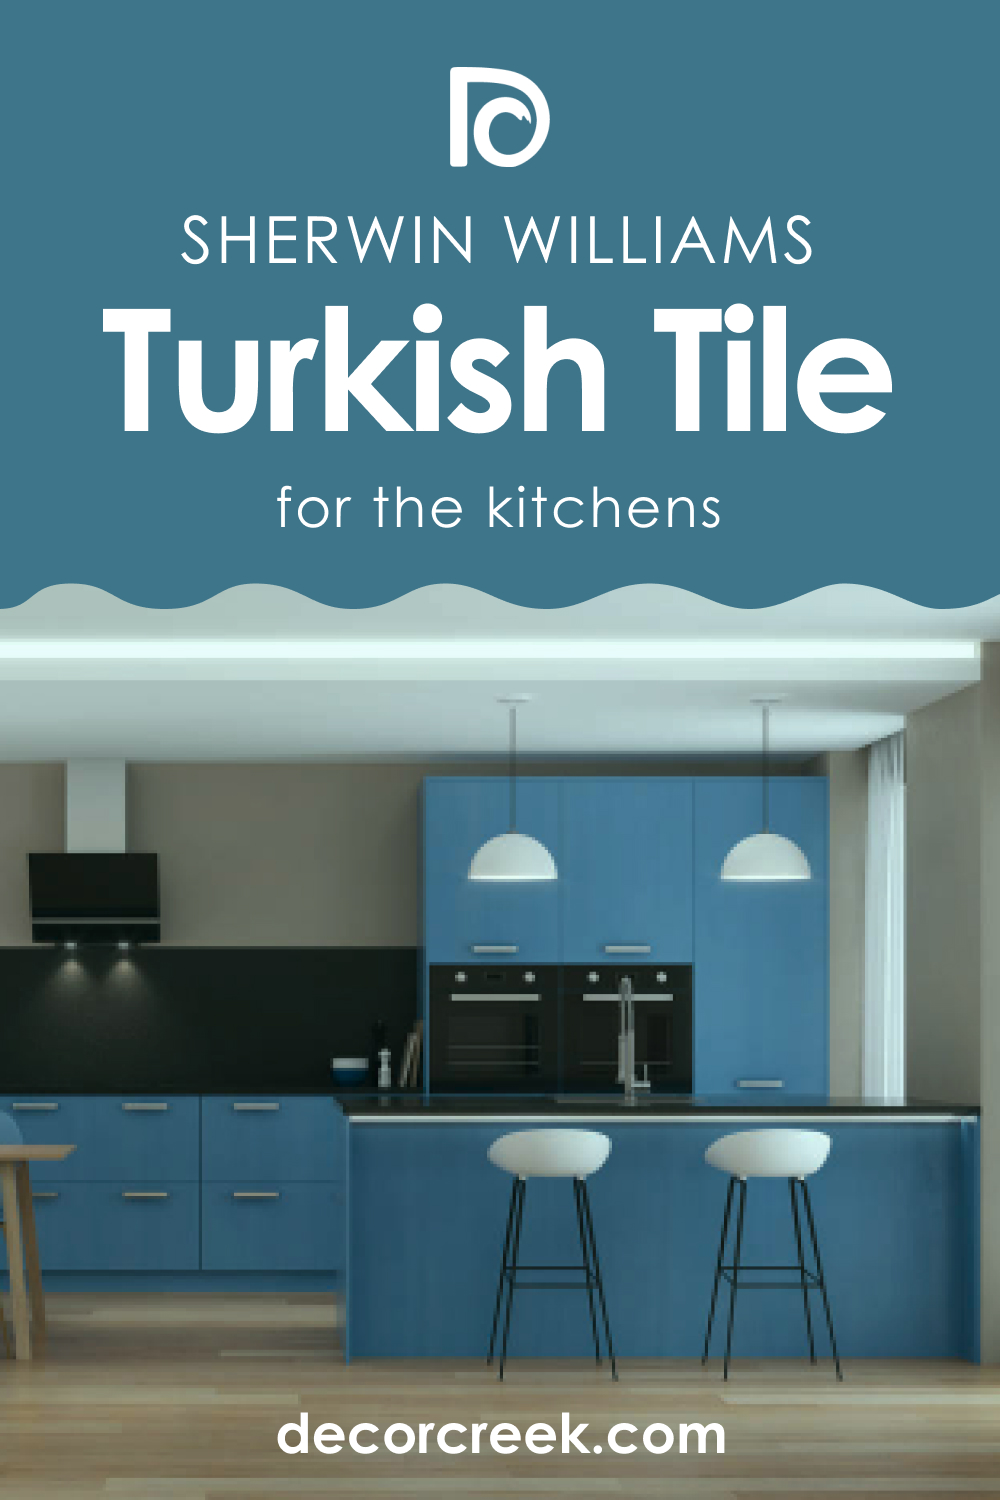 How to Use SW 7610 Turkish Tile for the Kitchen?